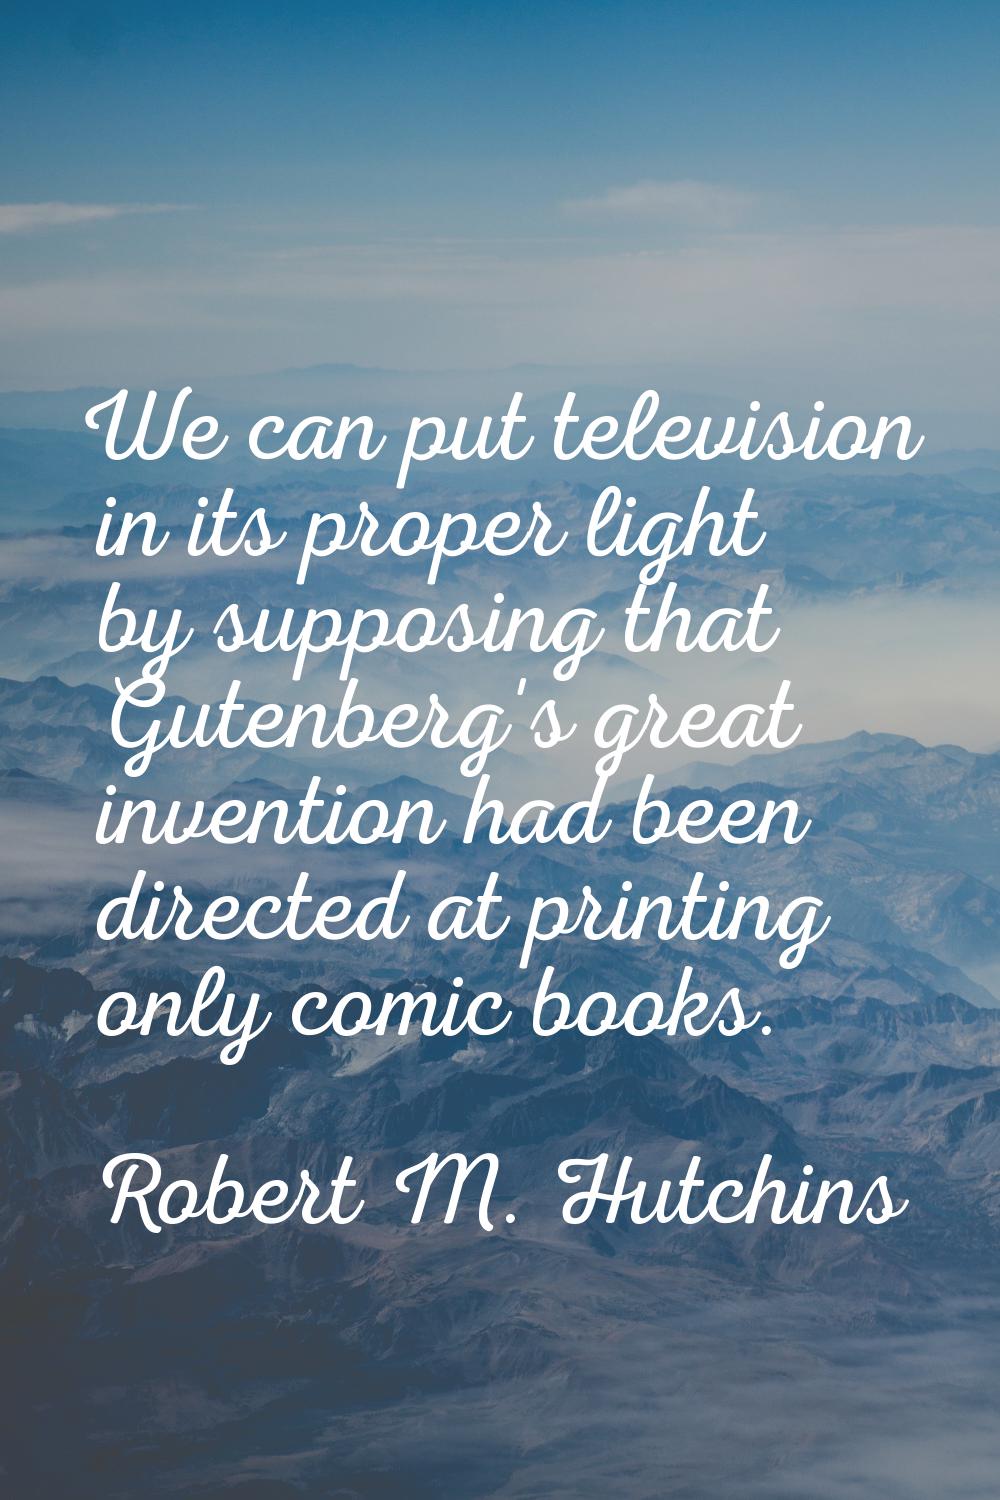 We can put television in its proper light by supposing that Gutenberg's great invention had been di